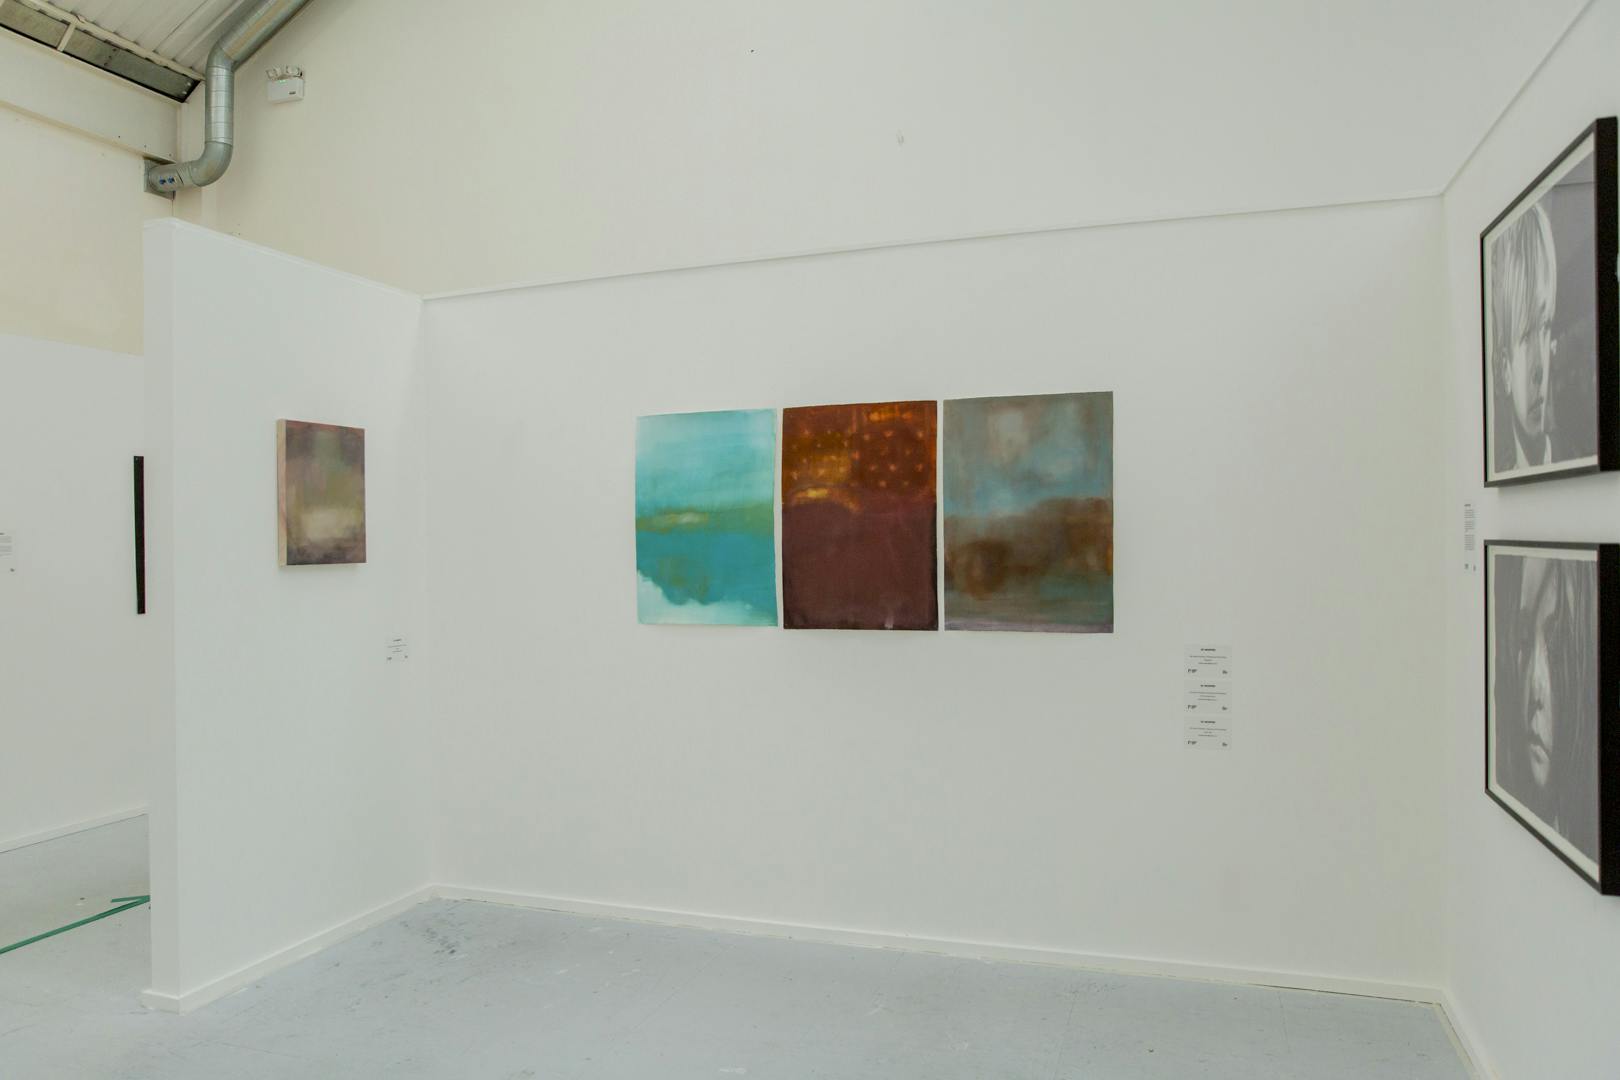 Image shows Jo Hooper's work in exhibition space with three paintings in the background on a neutral white background